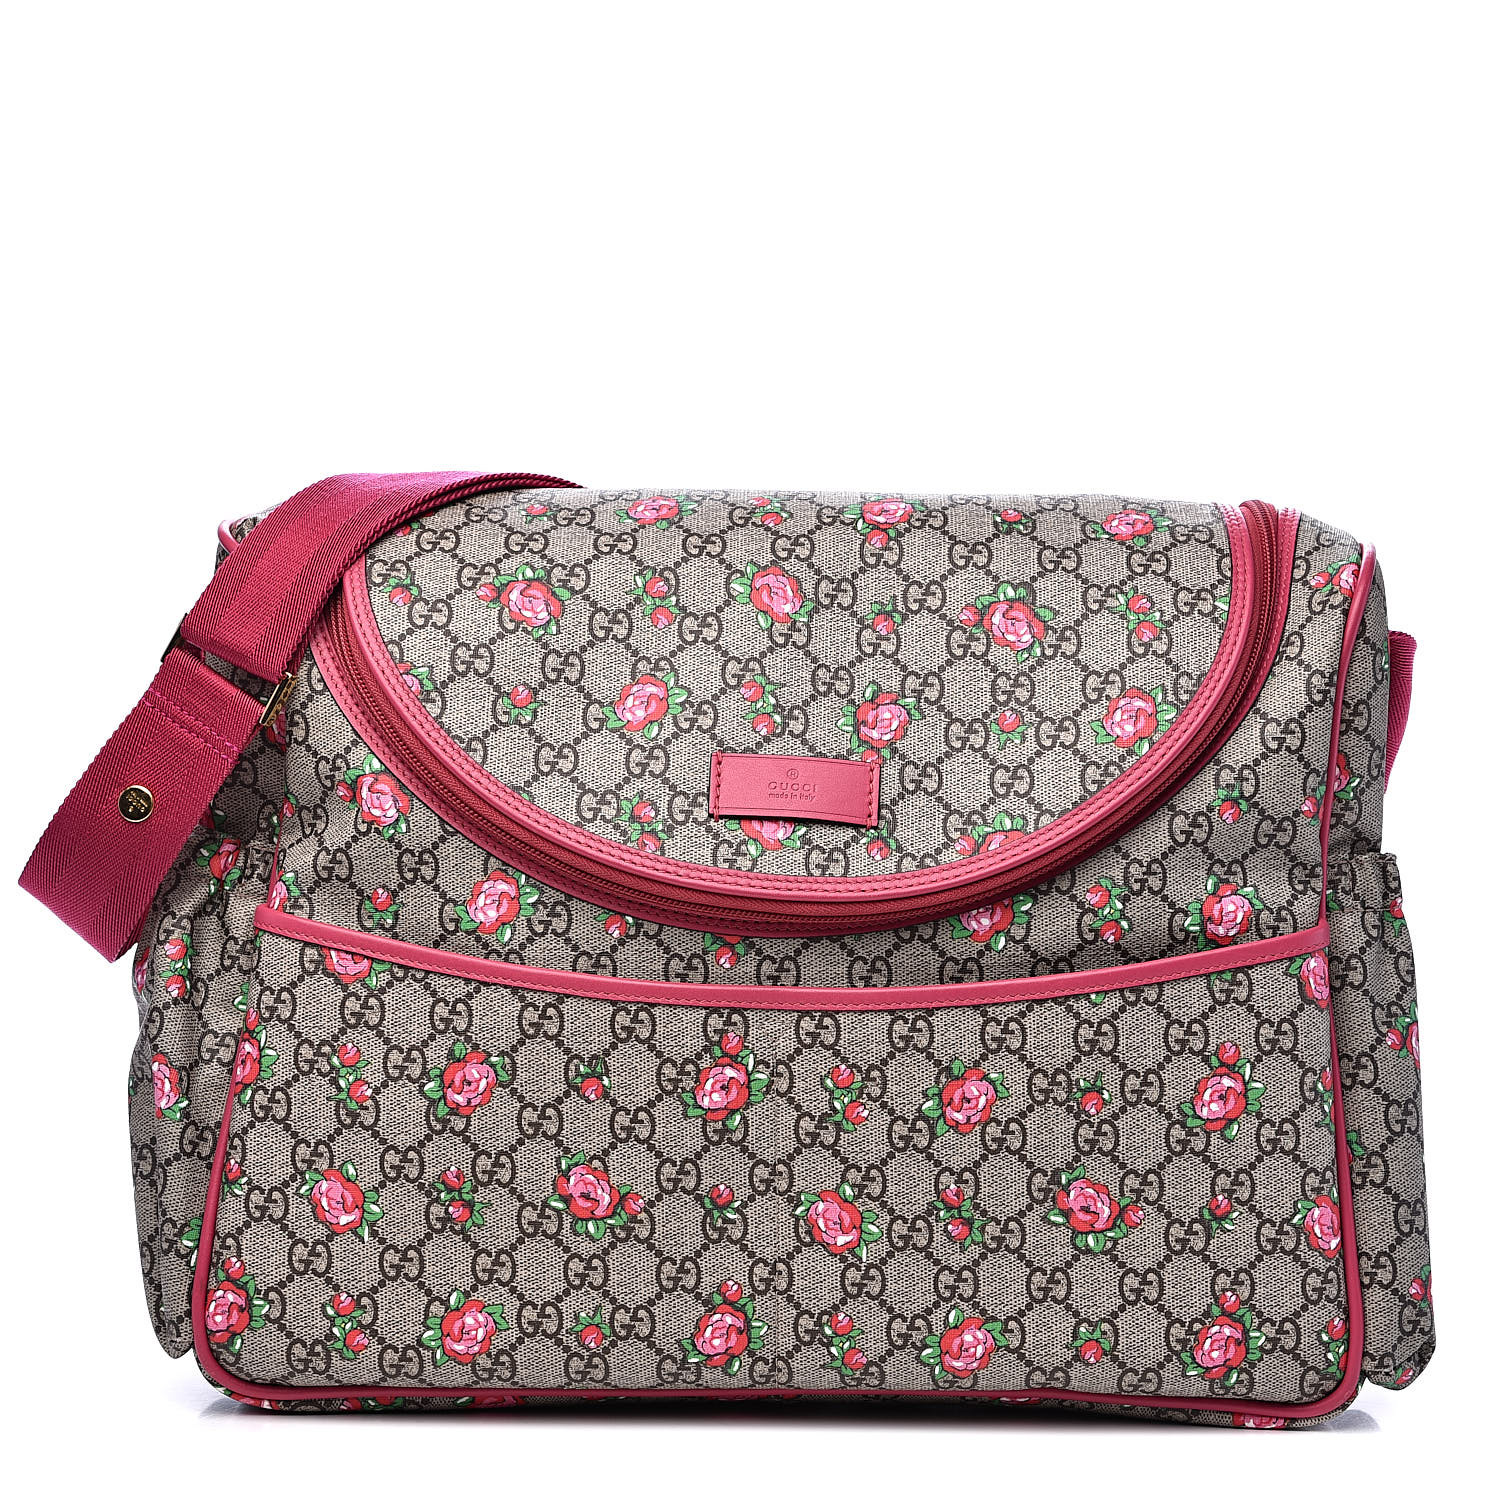 gucci diaper bag with roses